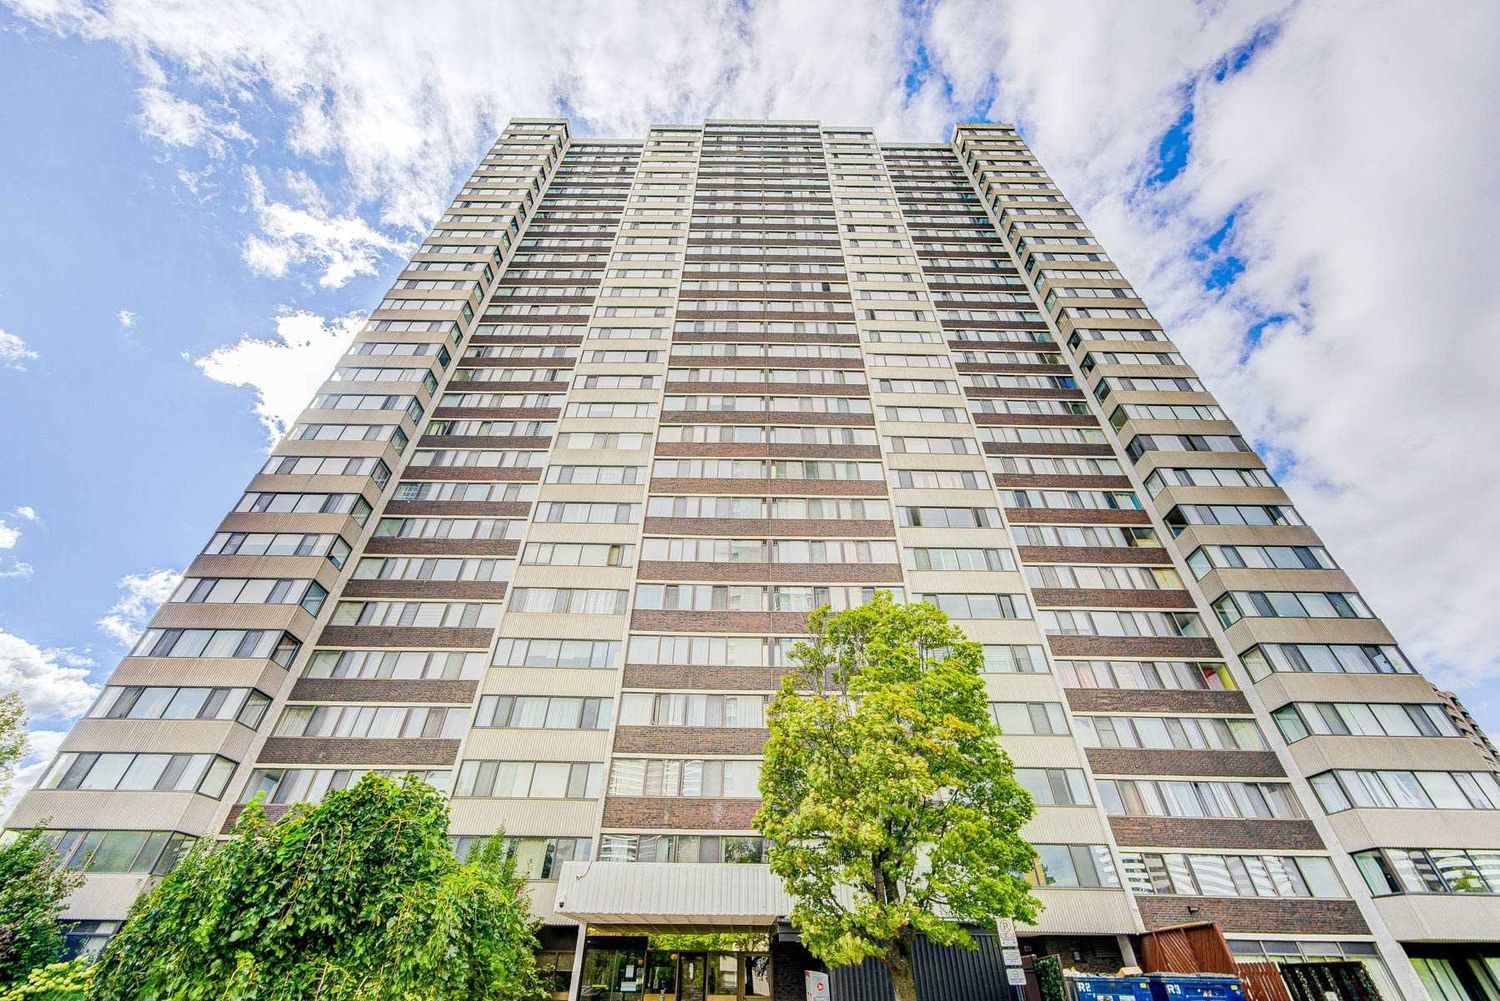 80 Antibes Drive. 80 Antibes Drive Condos is located in  North York, Toronto - image #2 of 2